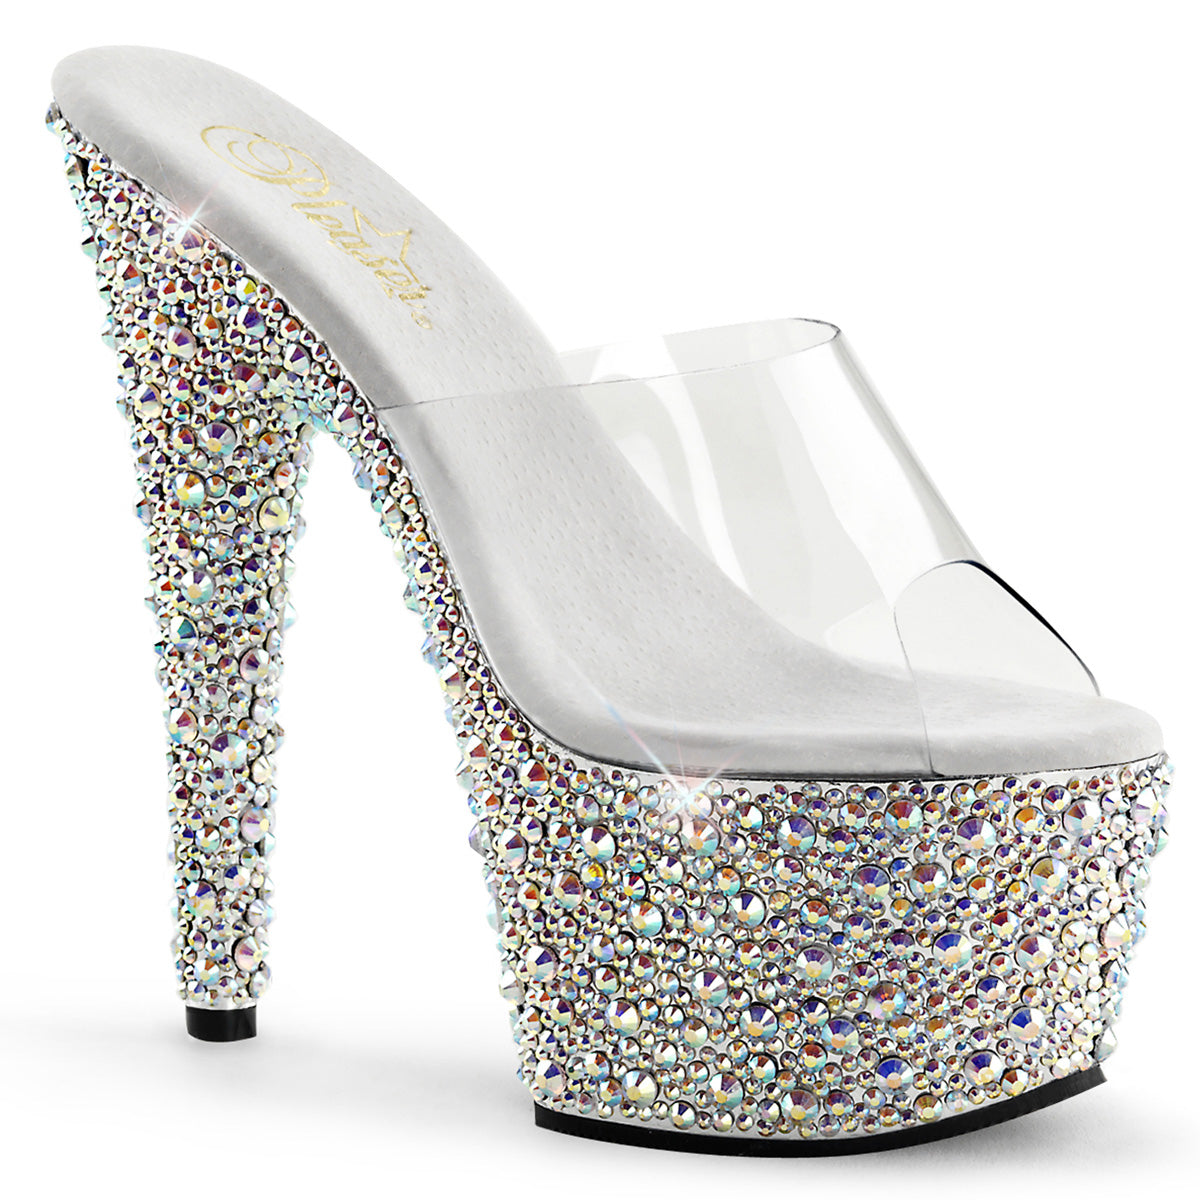 Bejeweled-701Ms Sexy 7 "Heel Clear Silver Bling Pantofi sexy